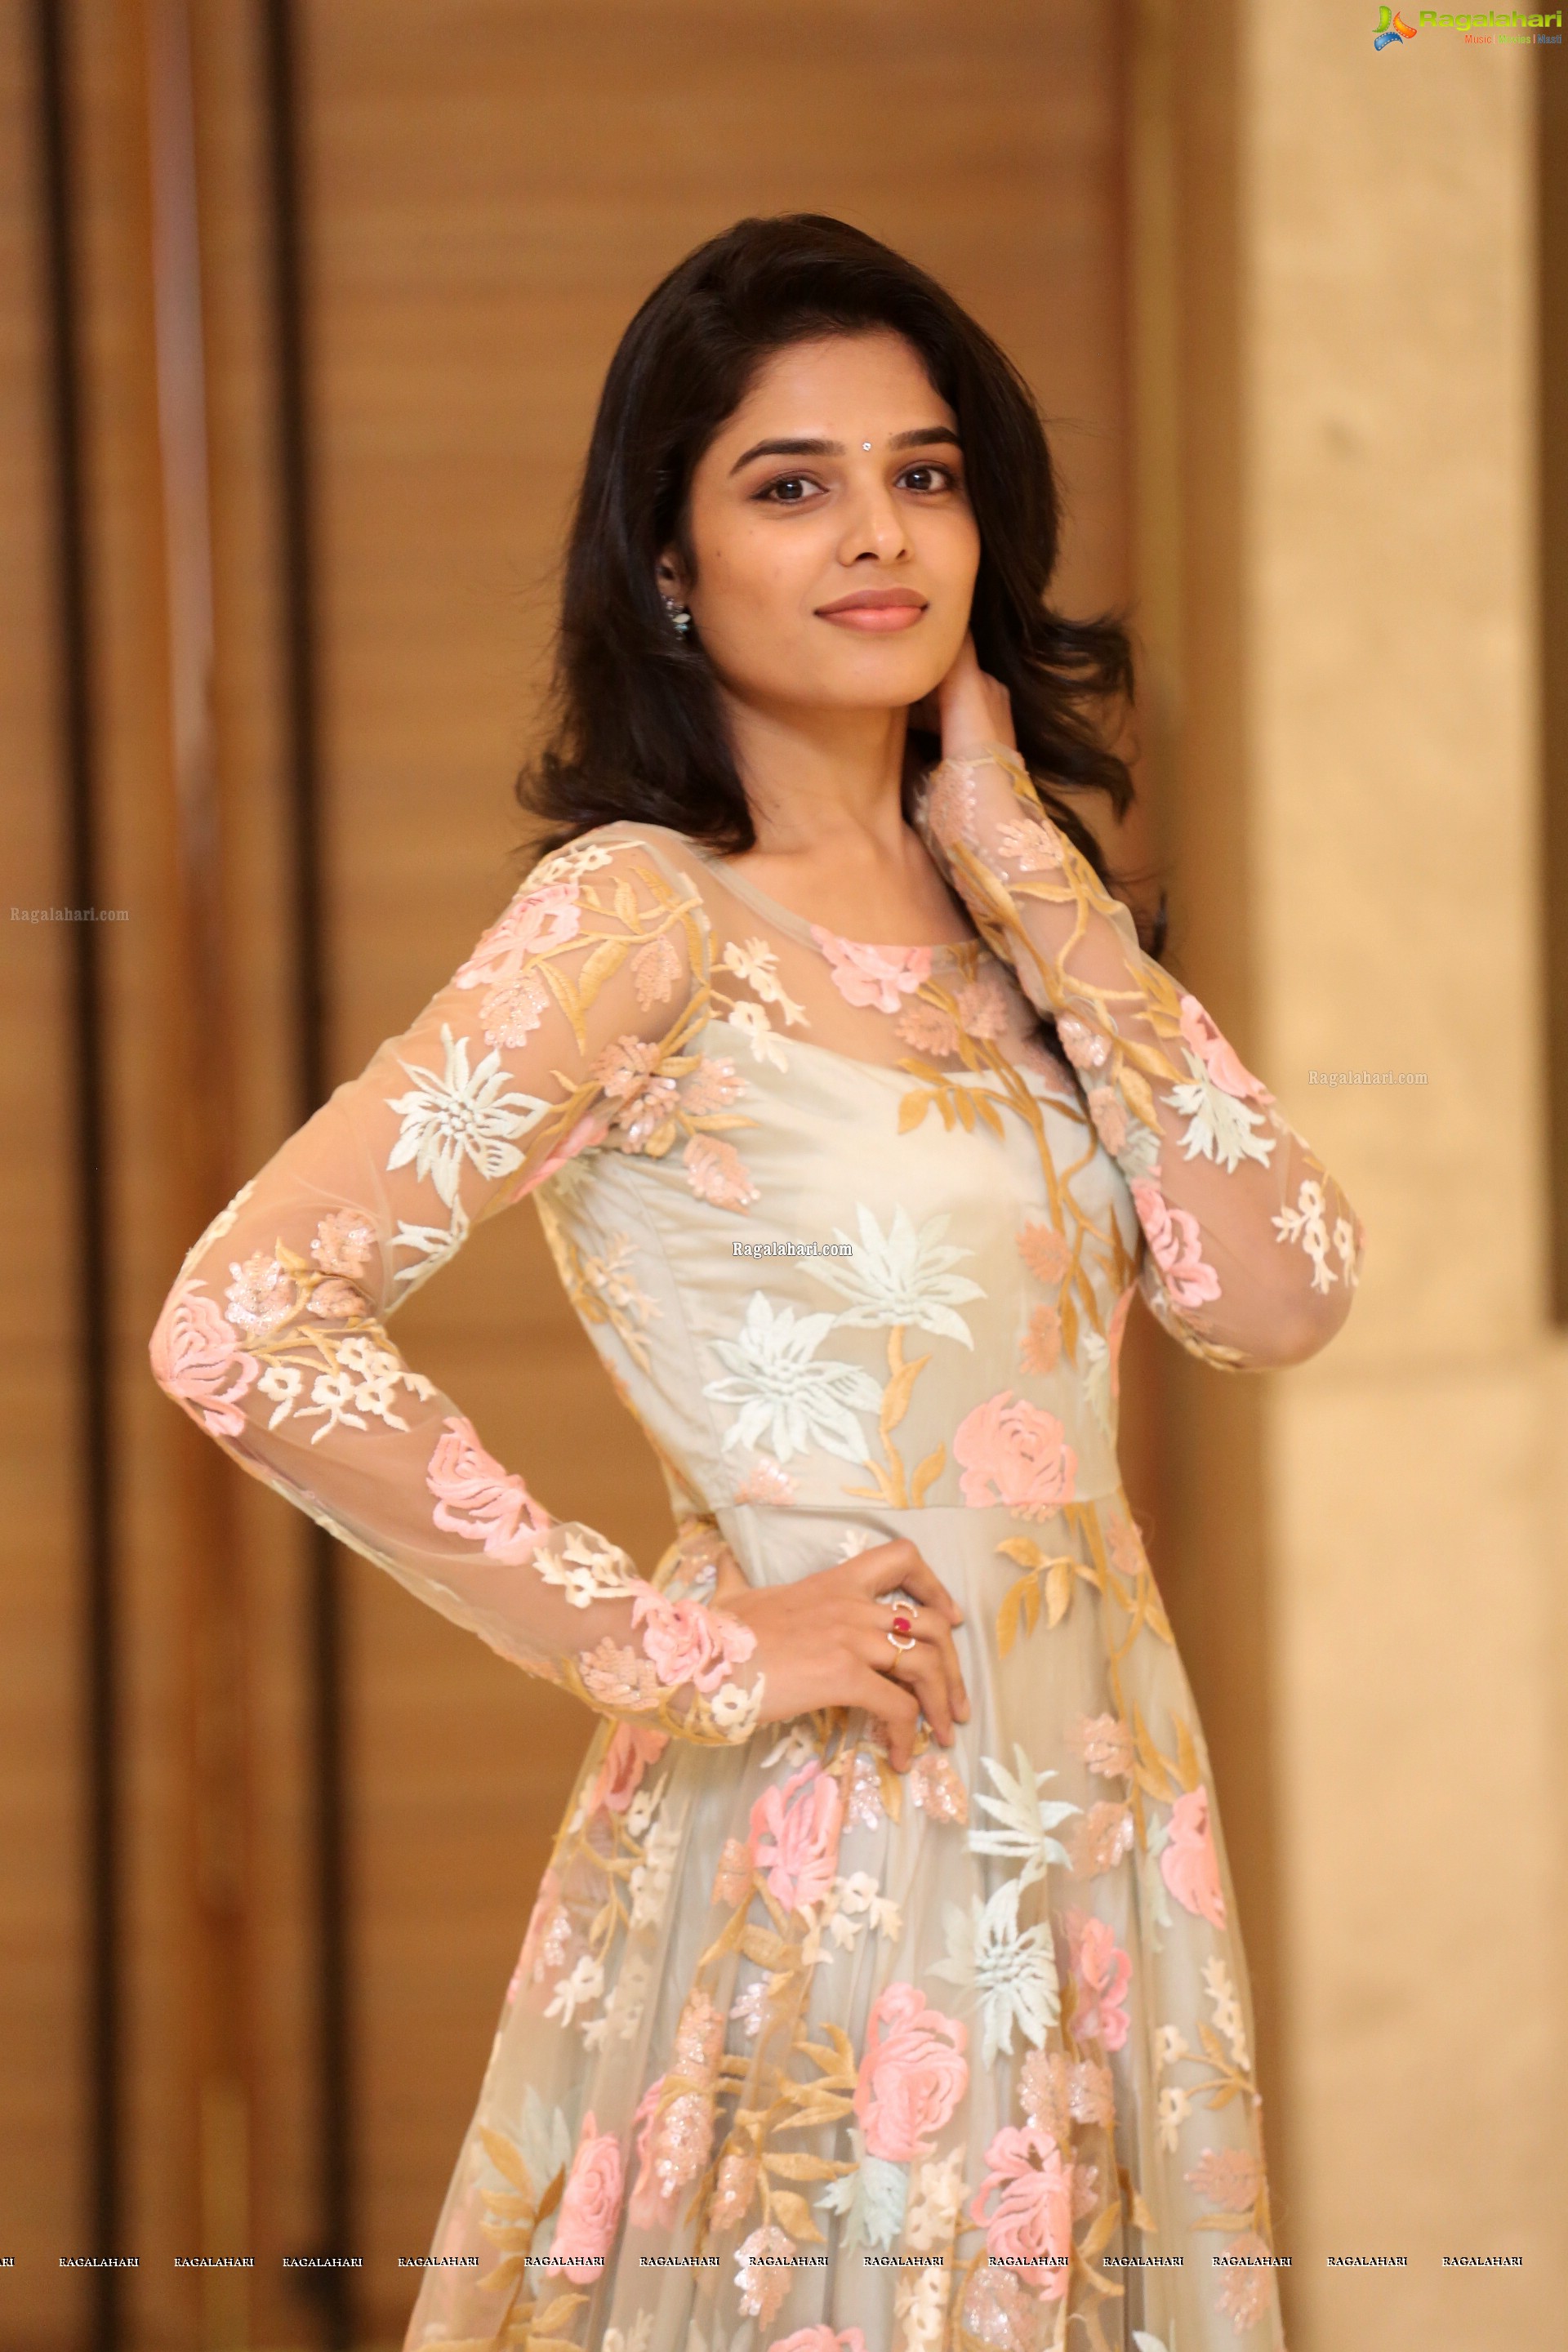 Harshitha Chowdary at Tholubommalata Movie Pre-Release Event HD Gallery, Images